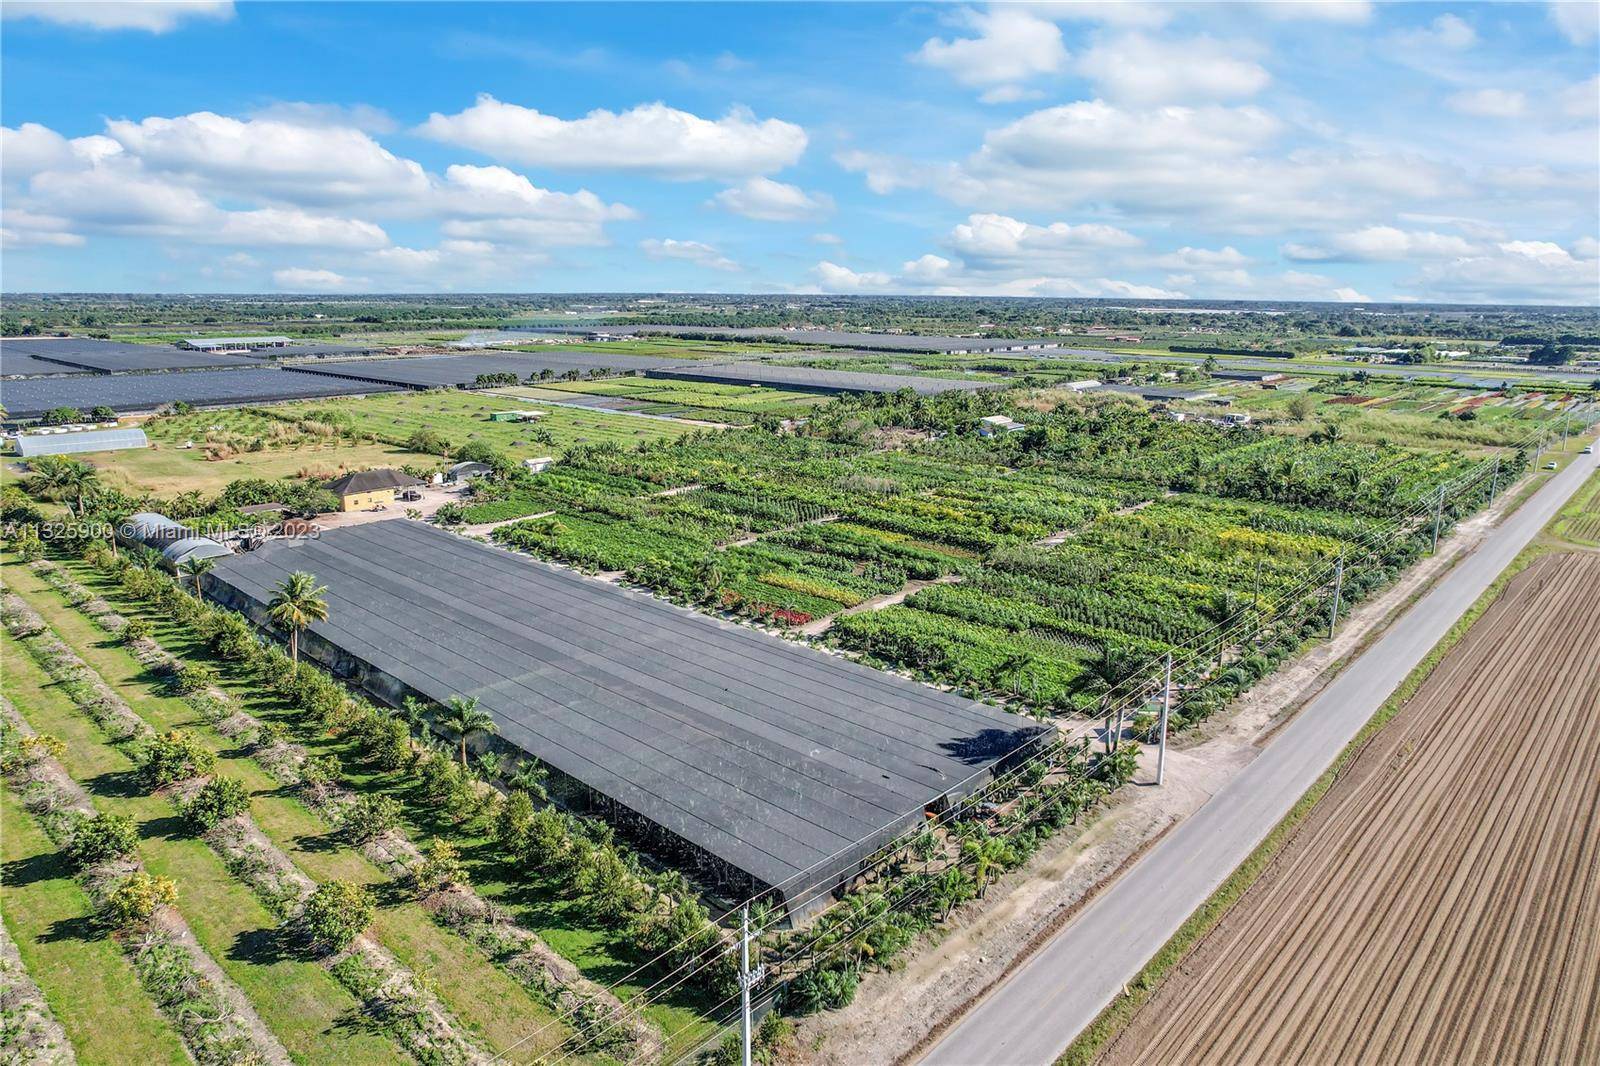 15 ACRE TURN KEY LUSH FIELD GROWN AND LARGE CONTAINERS 25 GAL PLUS PALM TREE PLANTATION WITH OVER 2 MILLION IN INVENTORY AND OVER 1 MILLION IN SALES.